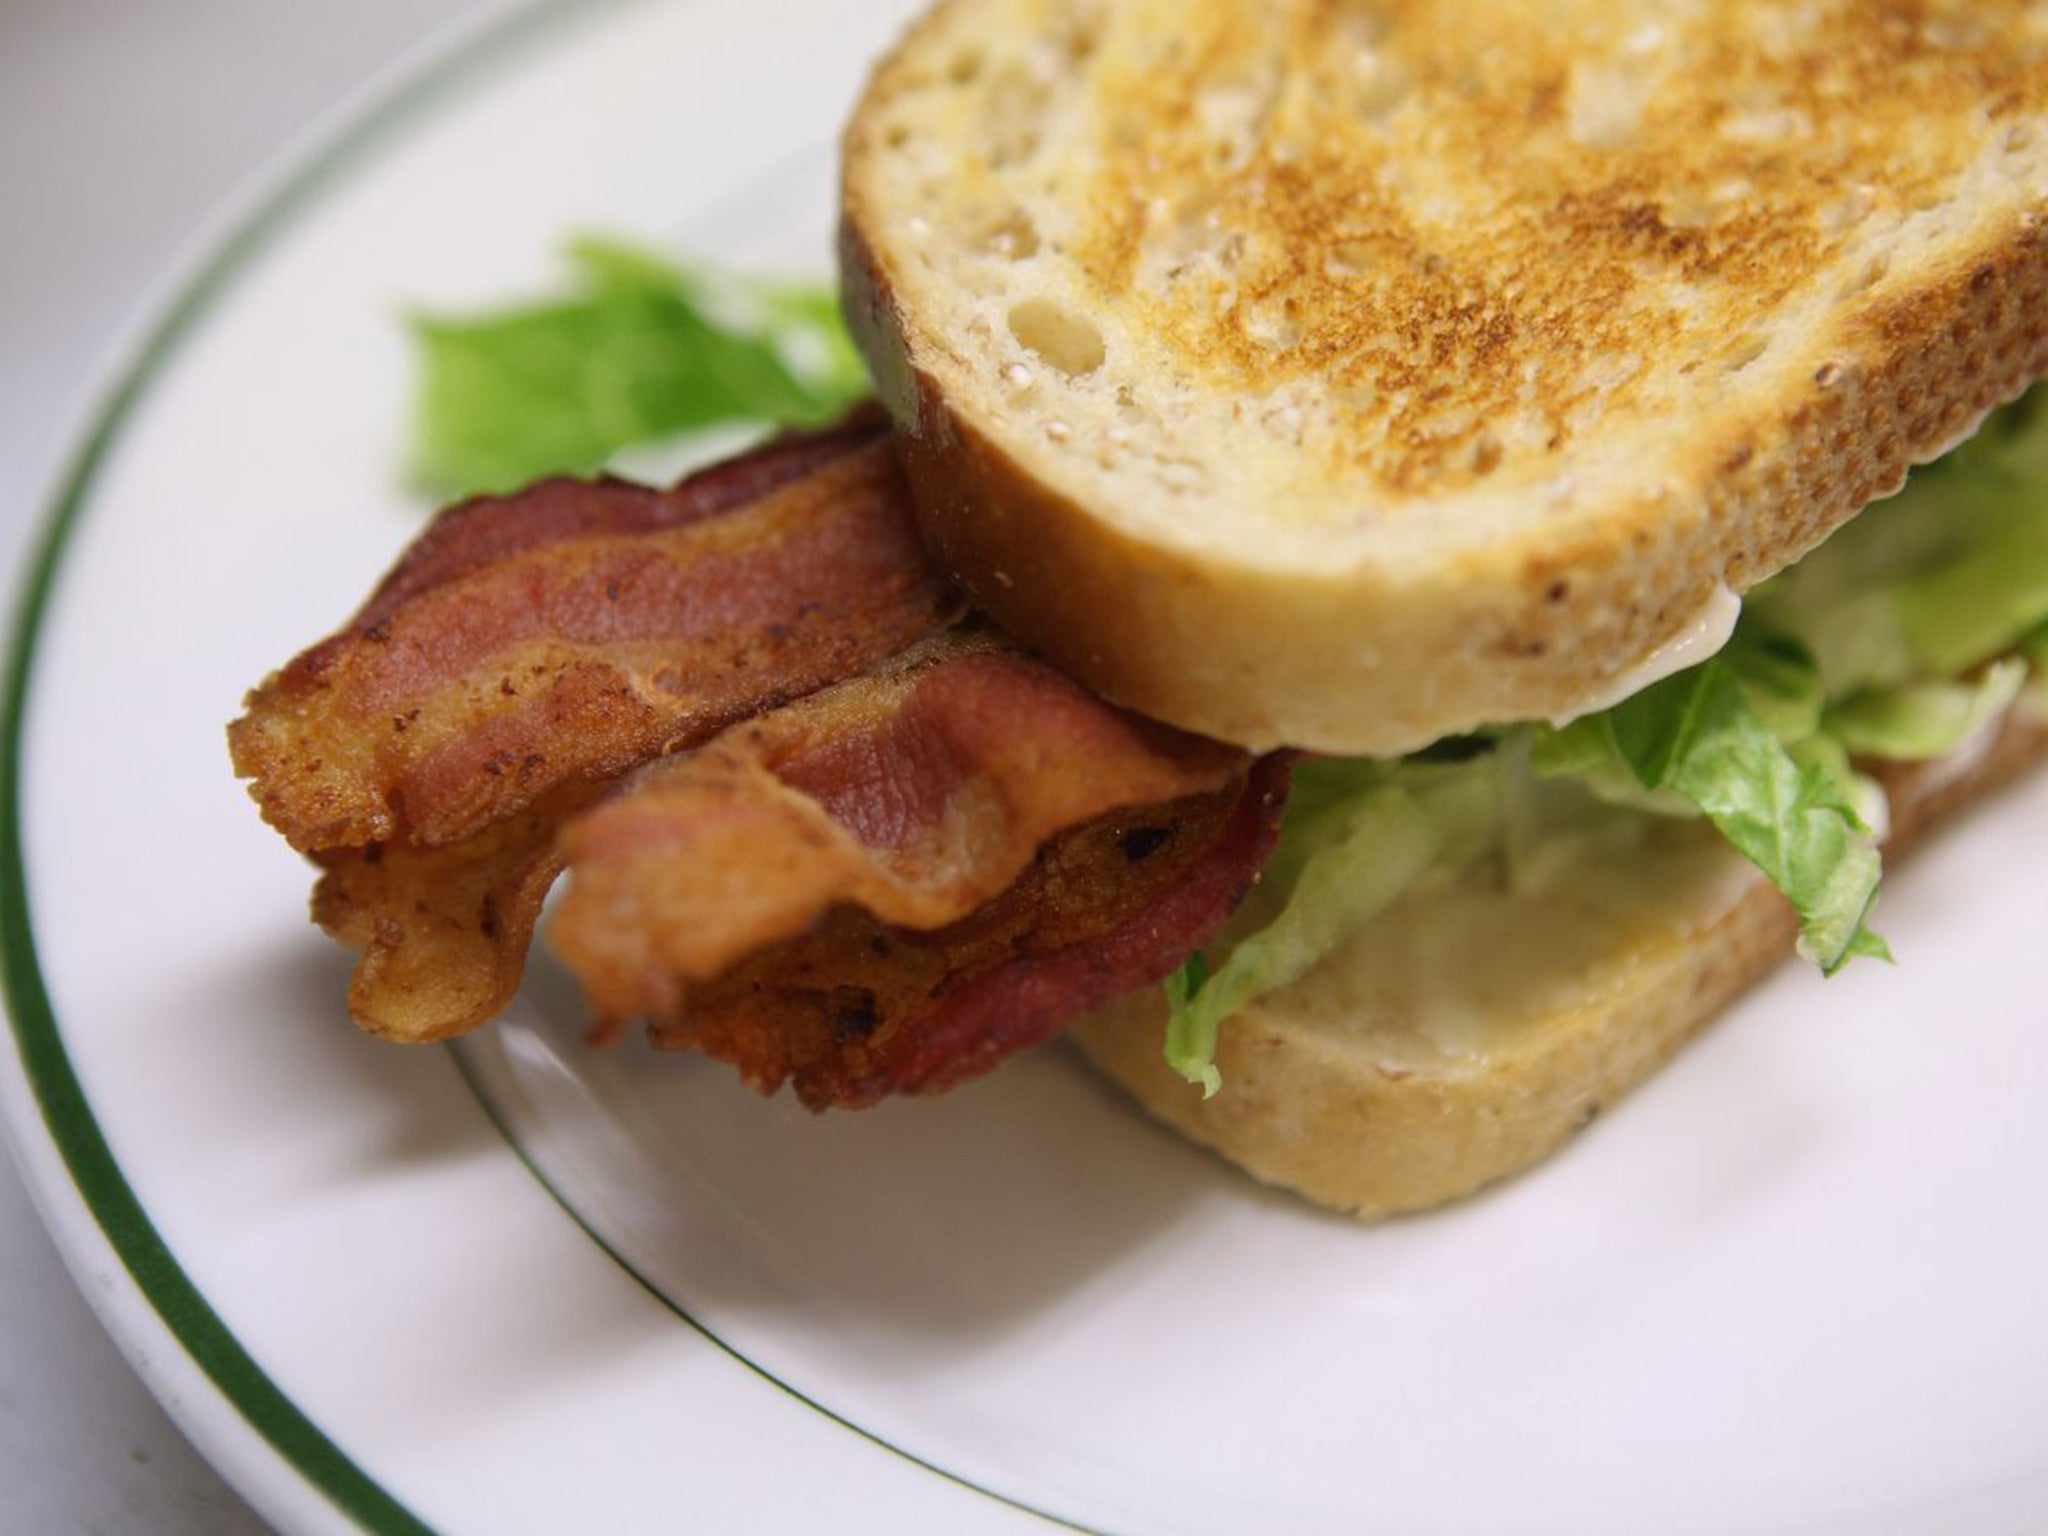 Processed meats like bacon have had a bad press recently